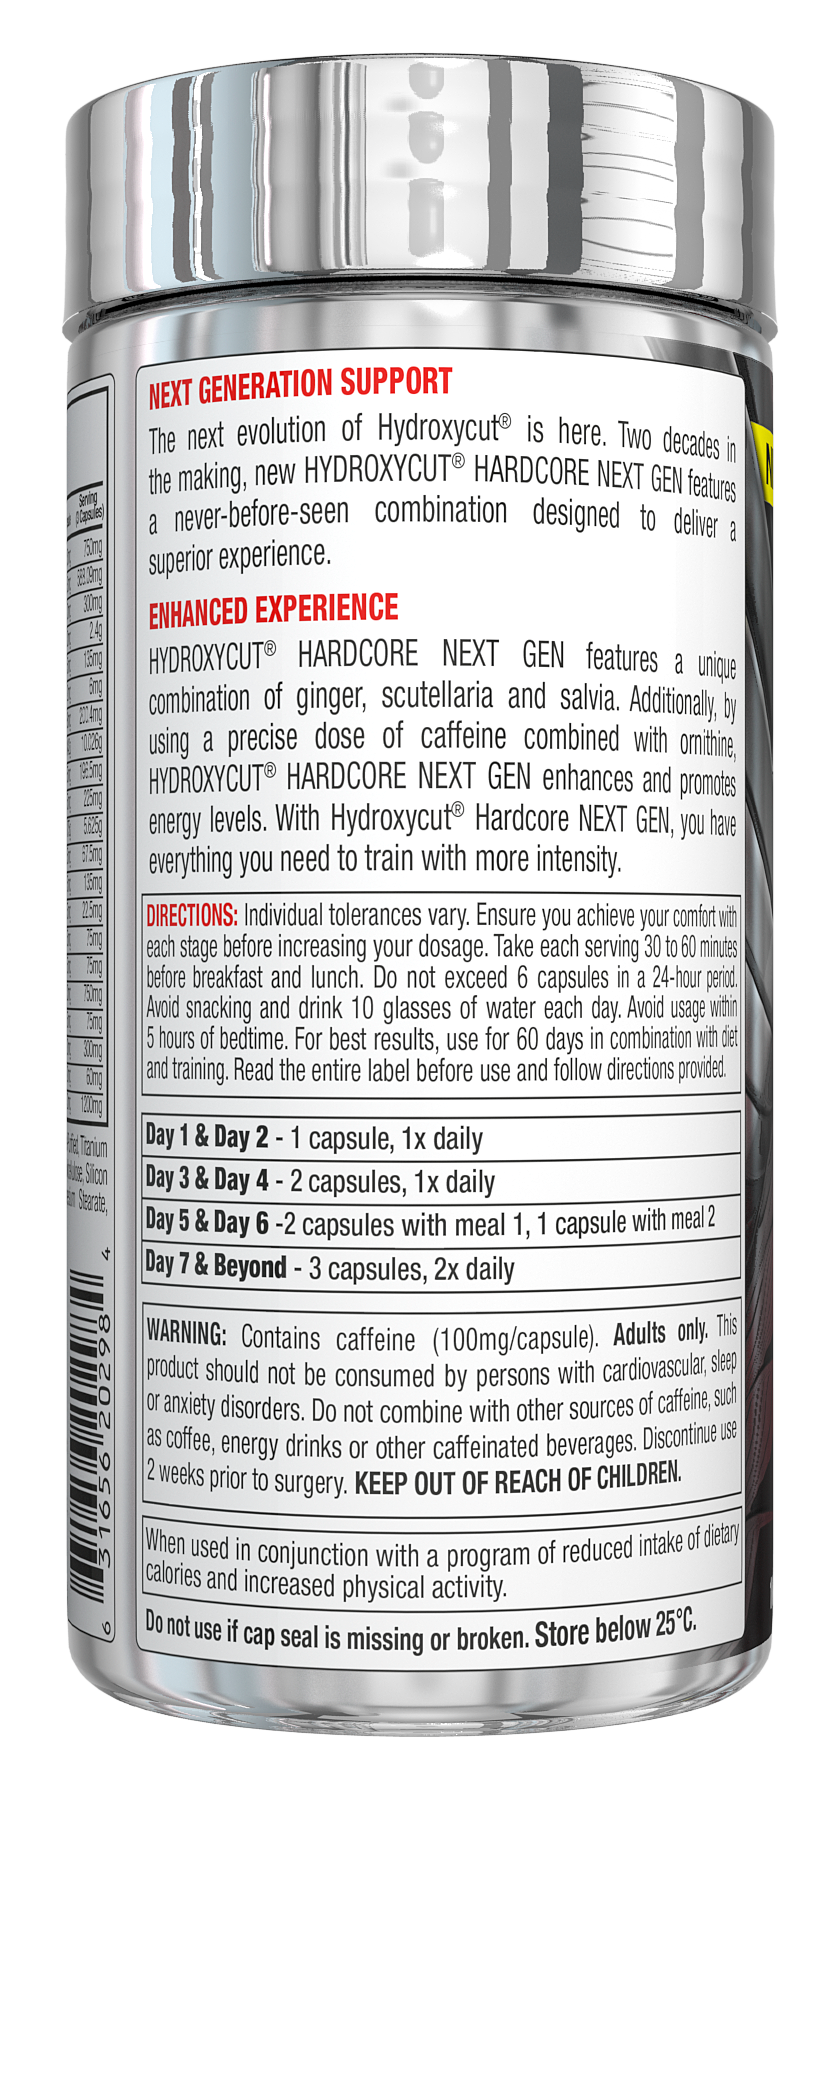 MuscleTech Hardcore Next Generation Weight Loss and Extreme Sensory Capsules, 100 Count - image 3 of 4